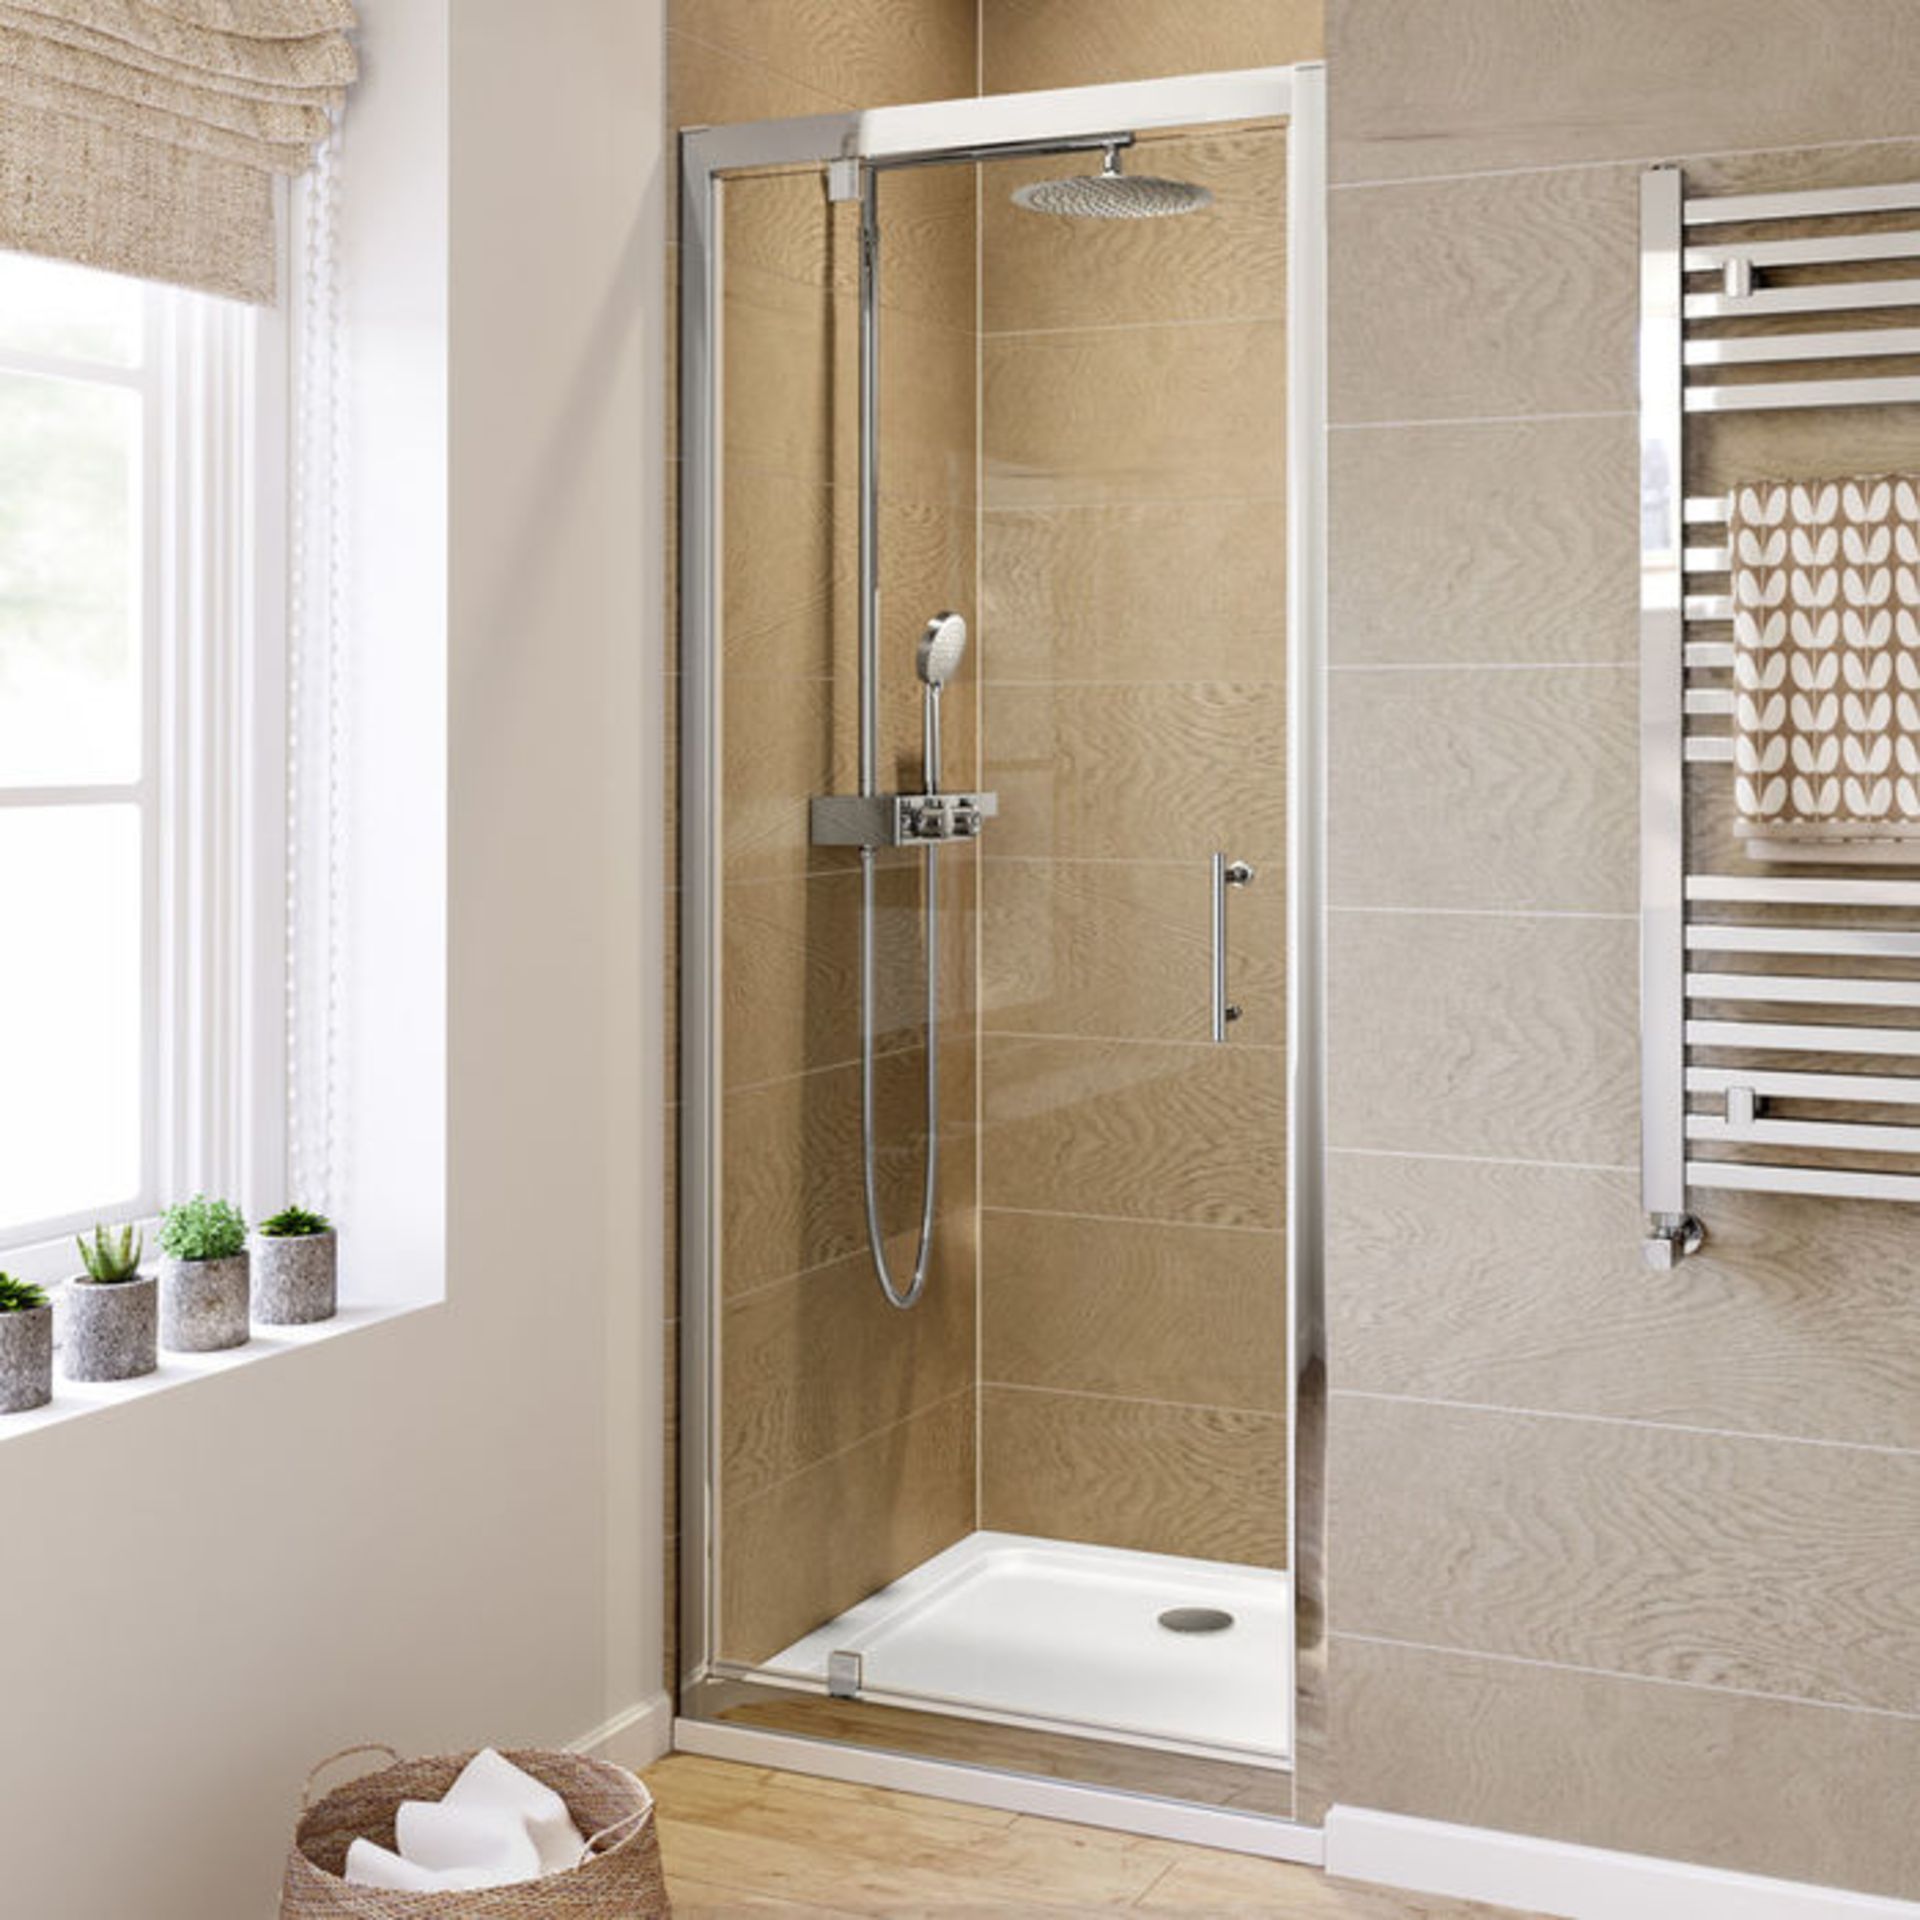 New 6mm - Elements Pivot 760mm Shower Door 6mm Safety Glass Fully Waterproof Tested Polished A... - Image 2 of 2